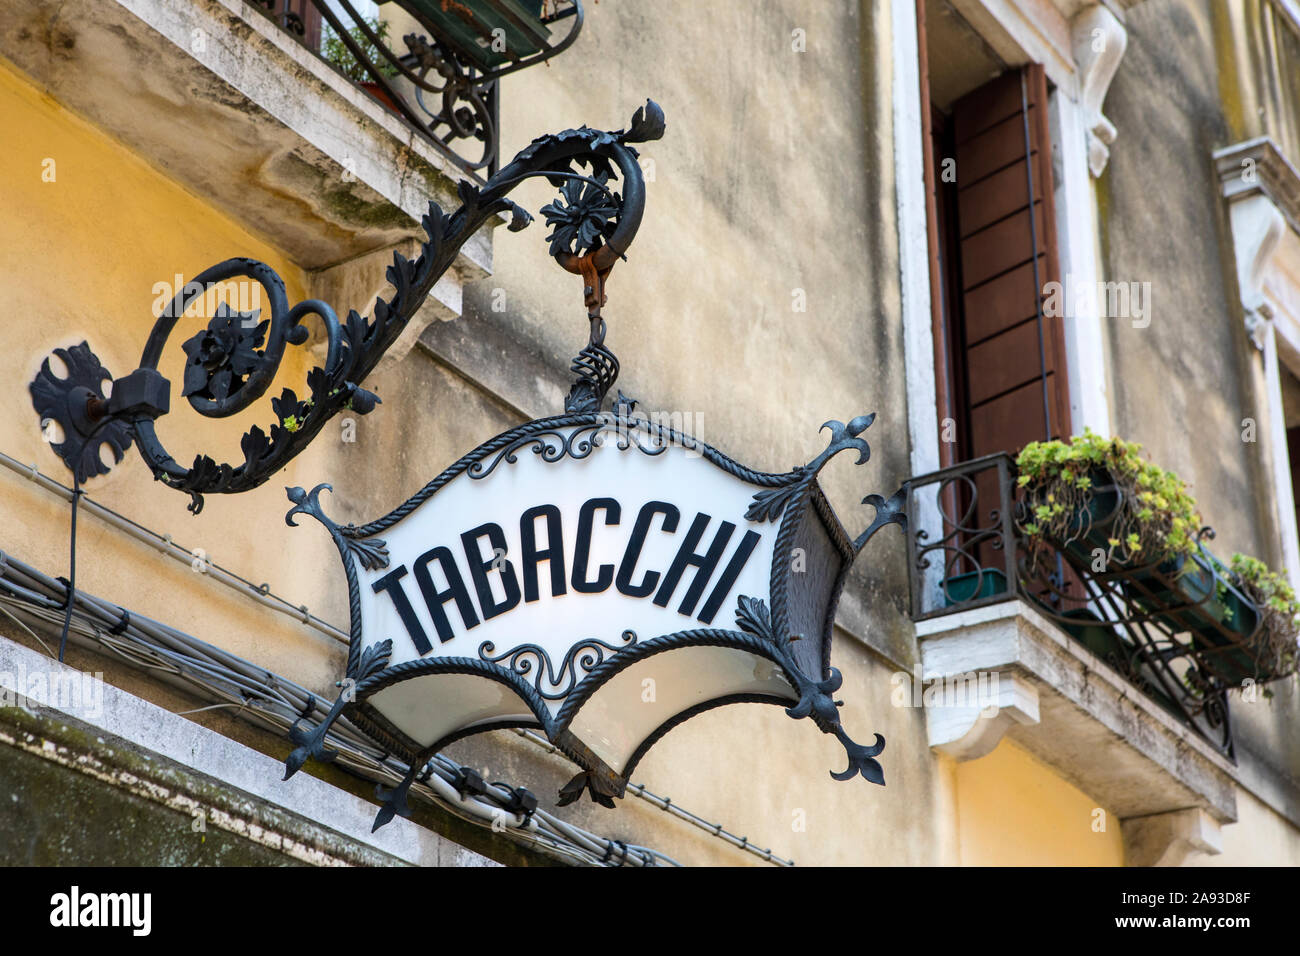 An old-fashioned Tabacchi, or Tobacco, sign above a shop in Venice, Italy. Stock Photo